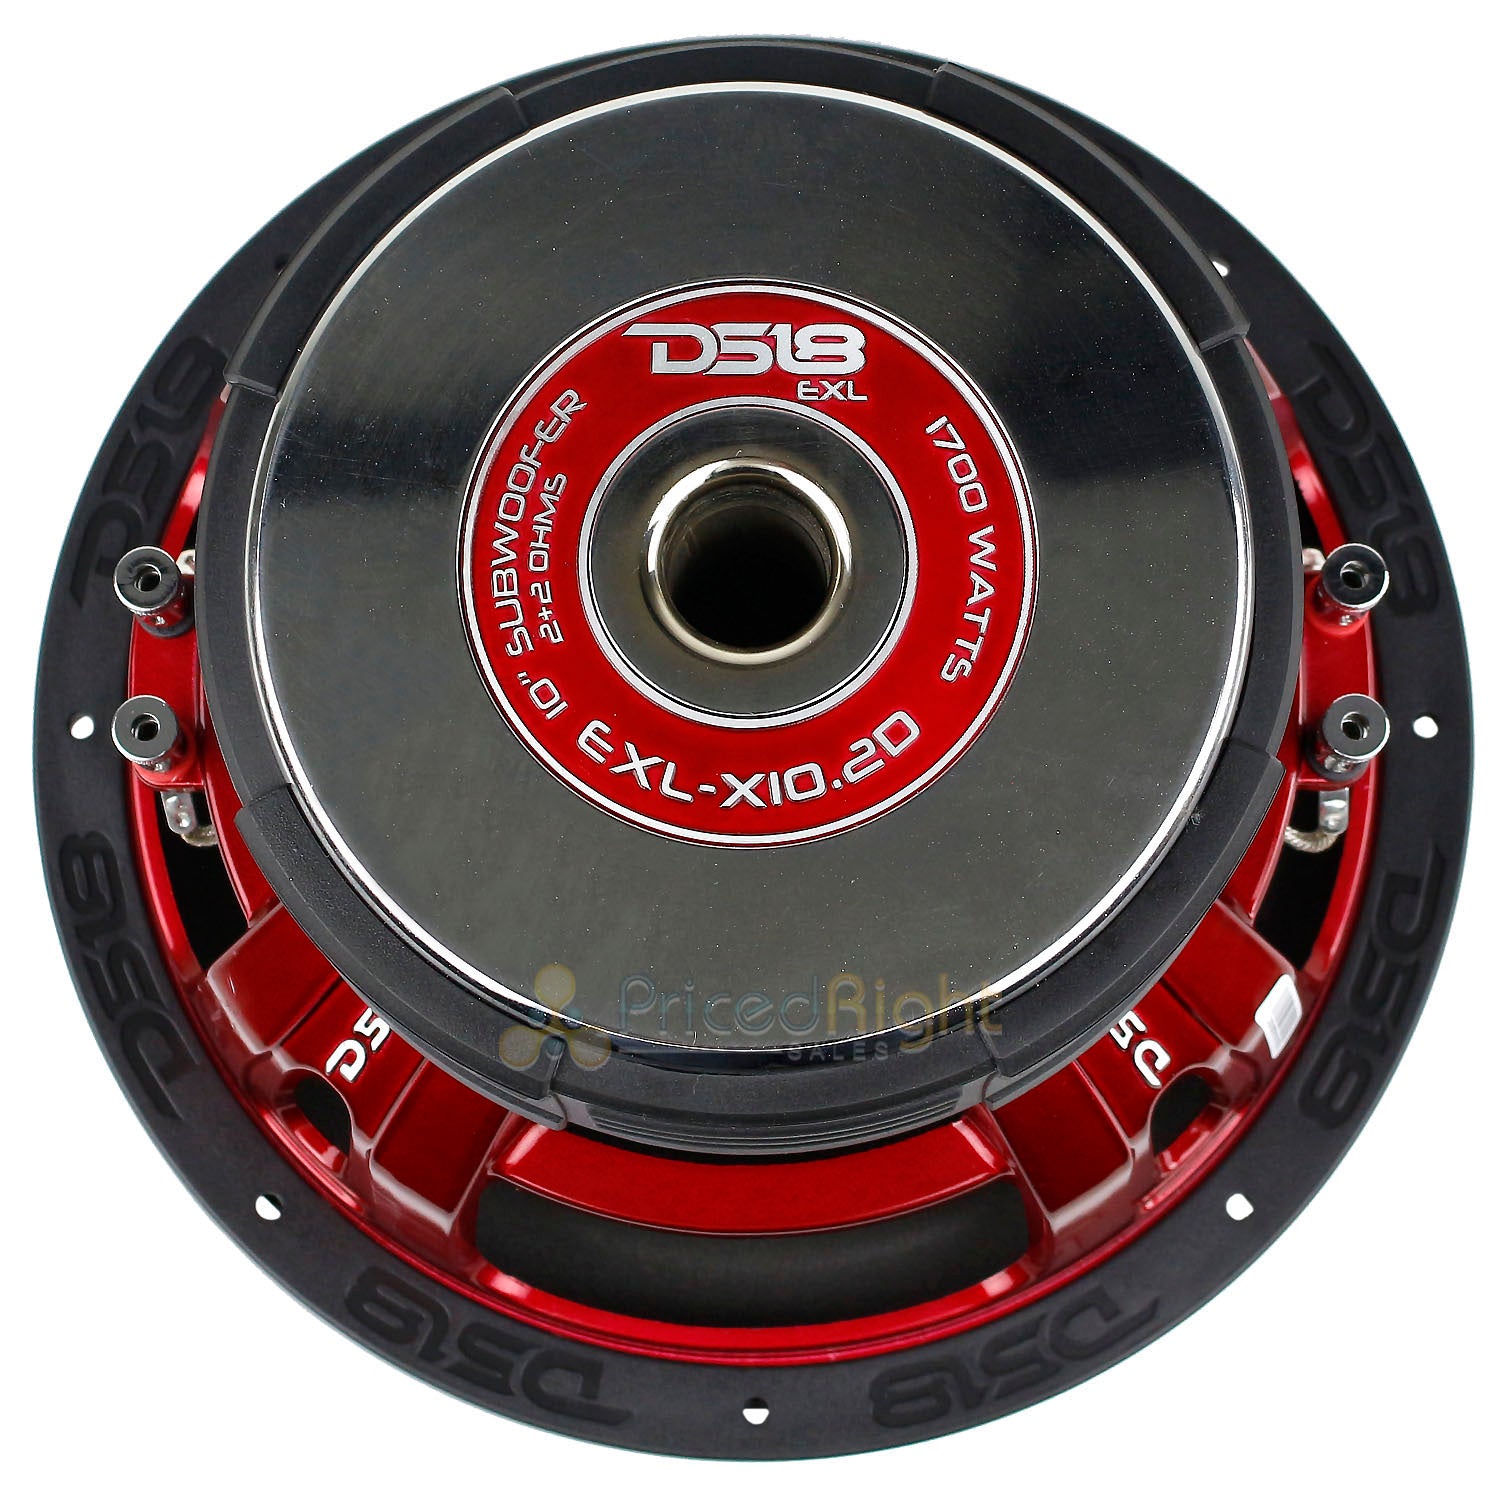 2 Pack EXL-X10.2D 10" Subwoofers Dual 2 Ohm 1700 Watts Max Bass Sub Car DS18